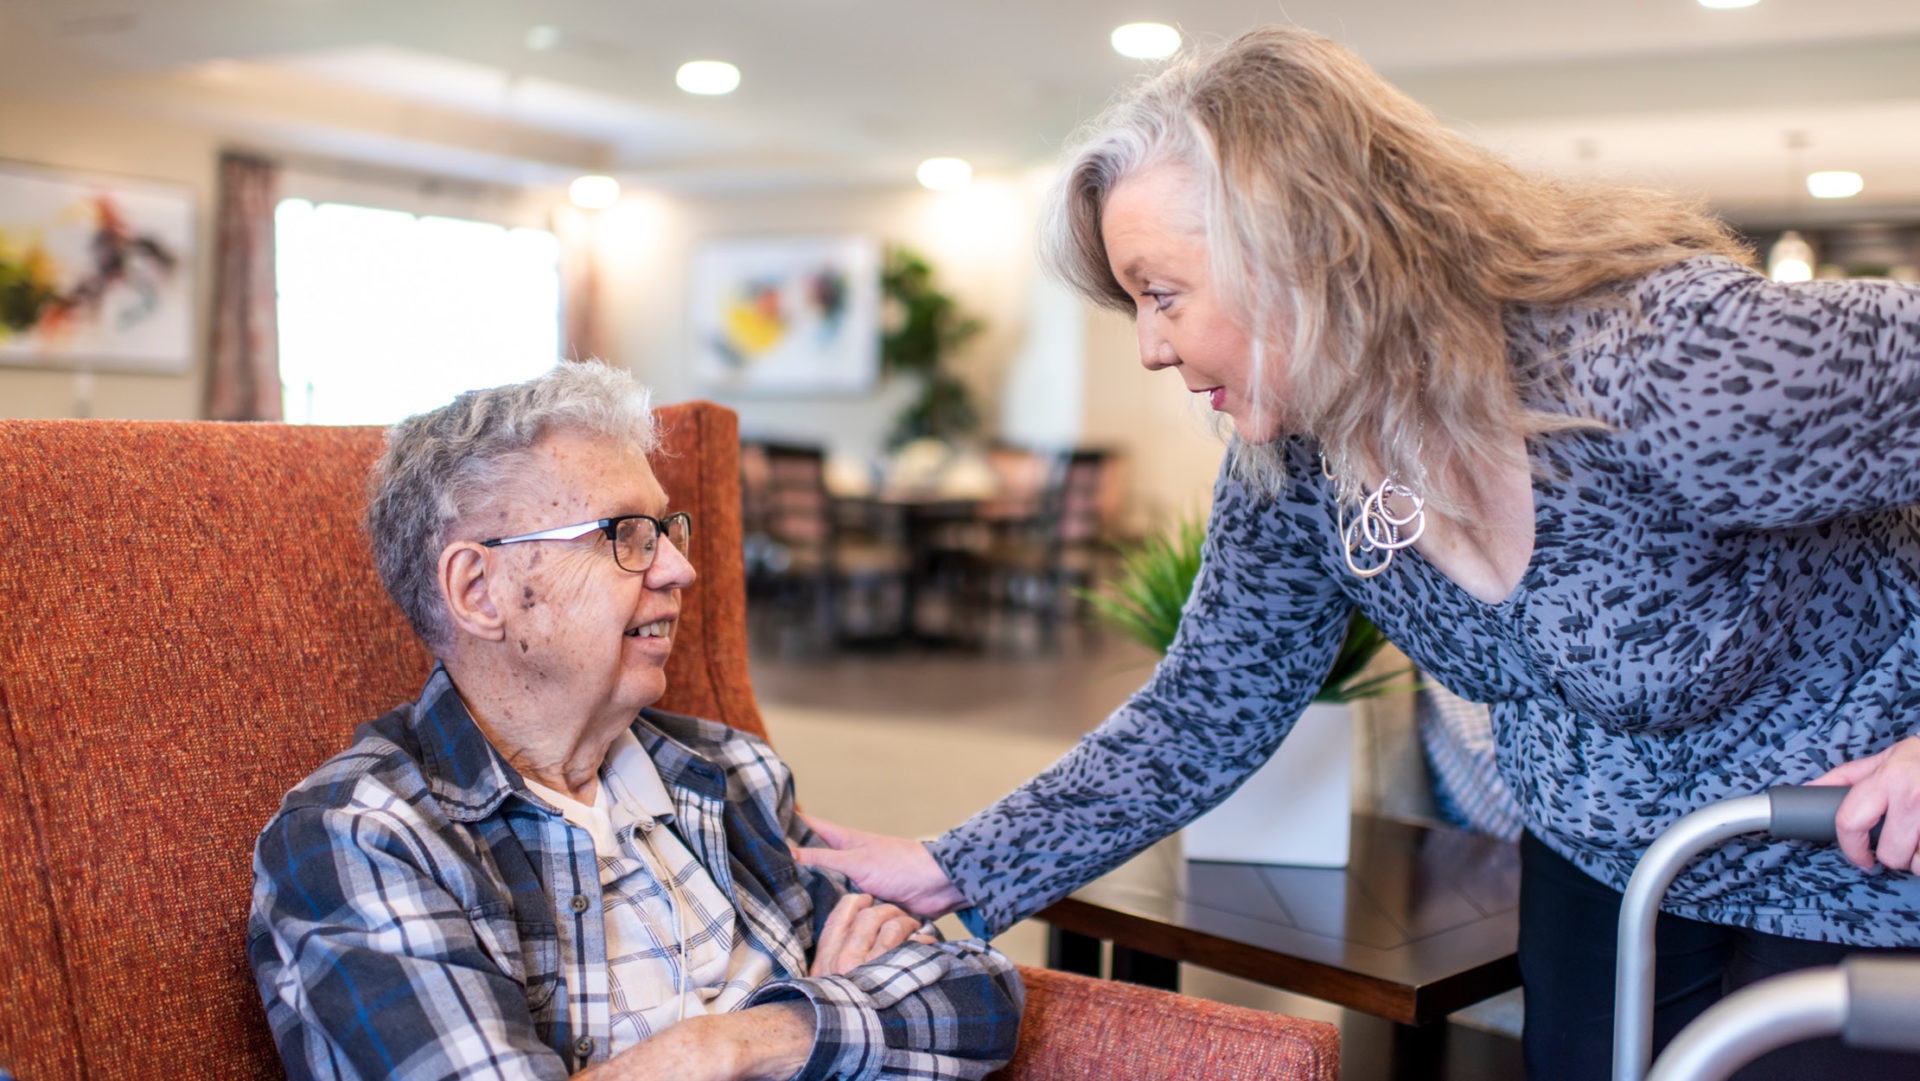 While we try to focus on this every day at Cross Creek at Lee’s Summit Assisted Living | Memory Care, we have especially tried to extend support to caregivers throughout November’s National Family Caregivers Month.